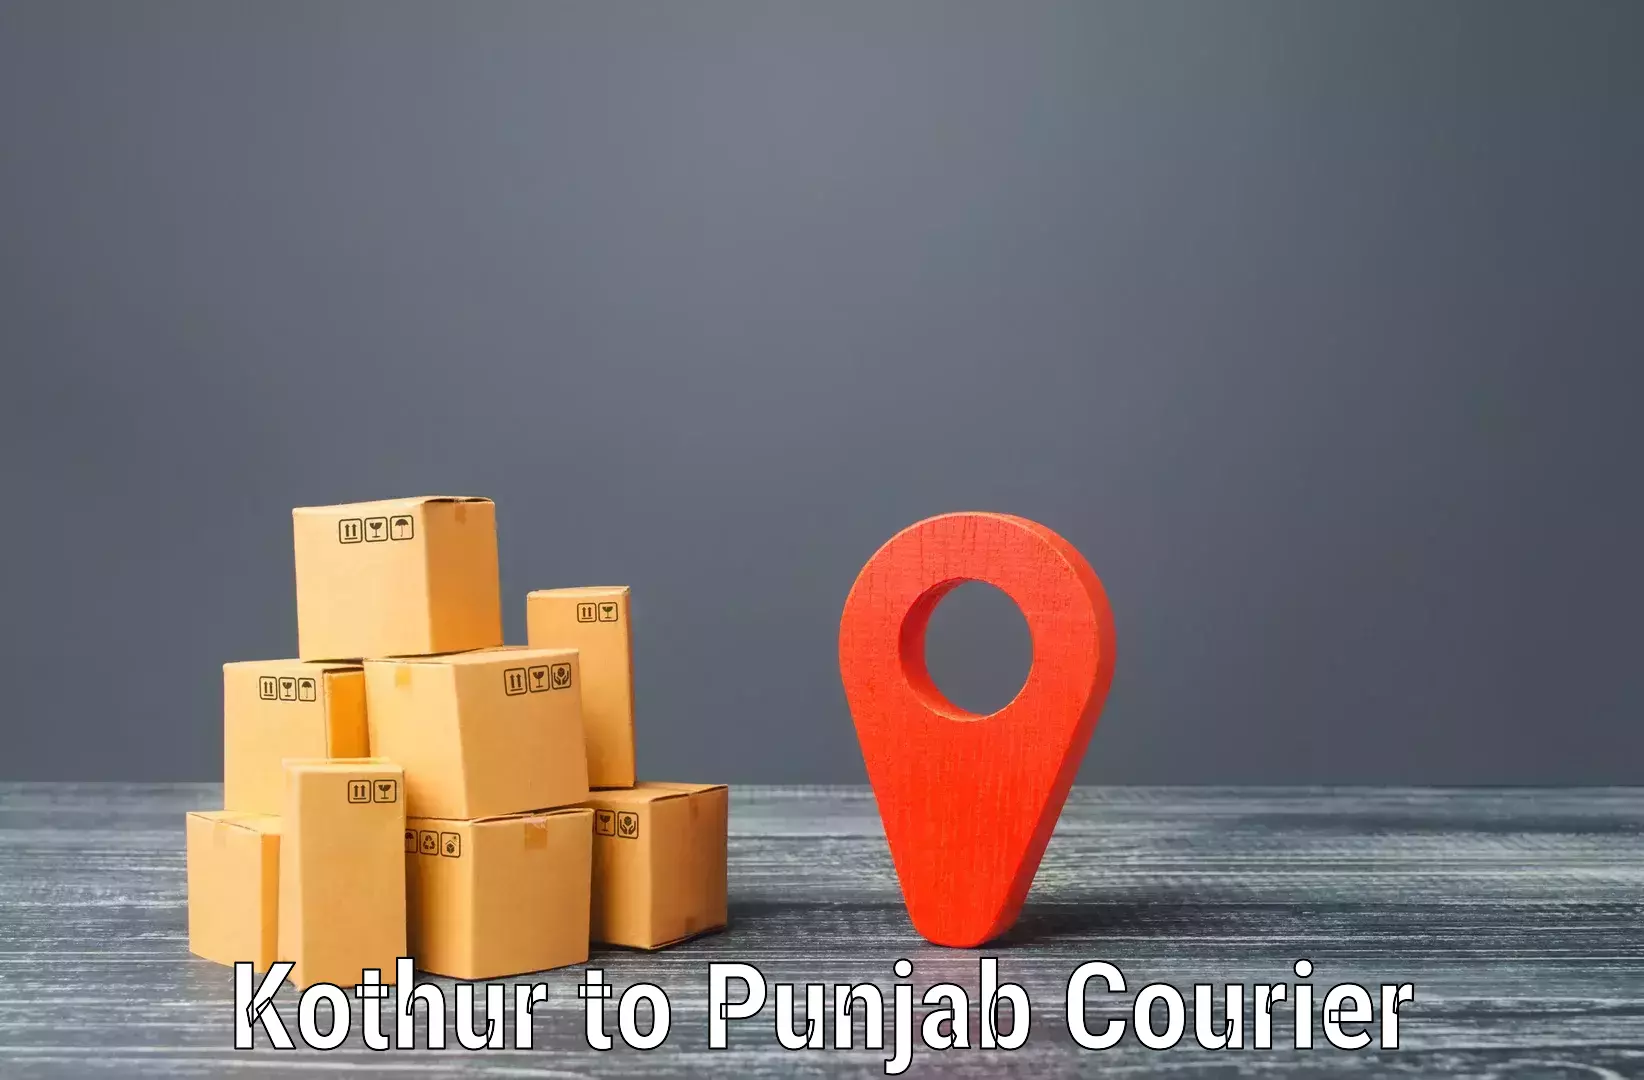 On-time delivery services Kothur to Punjab